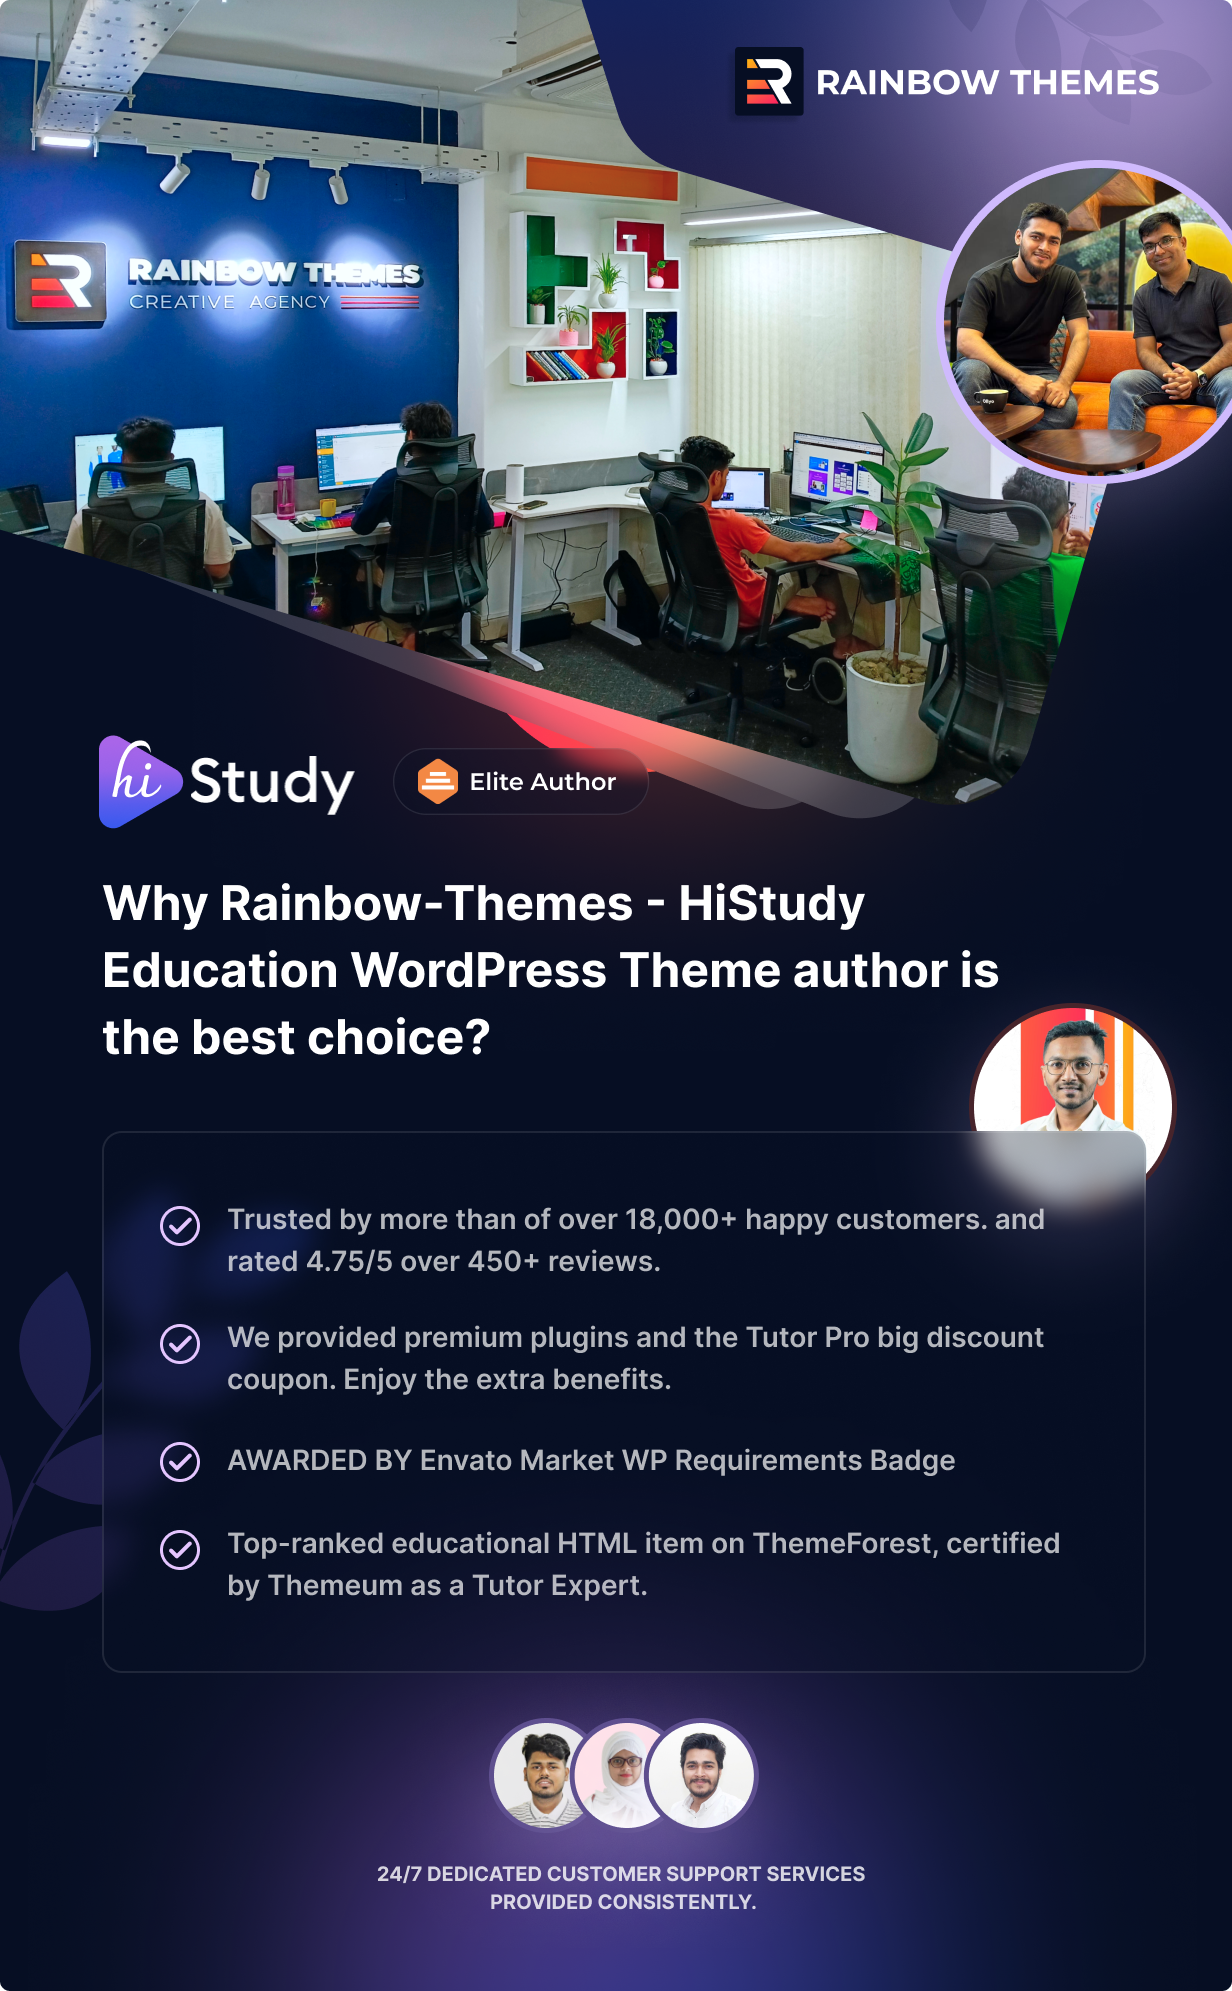 Why Purchase Histudy Theme